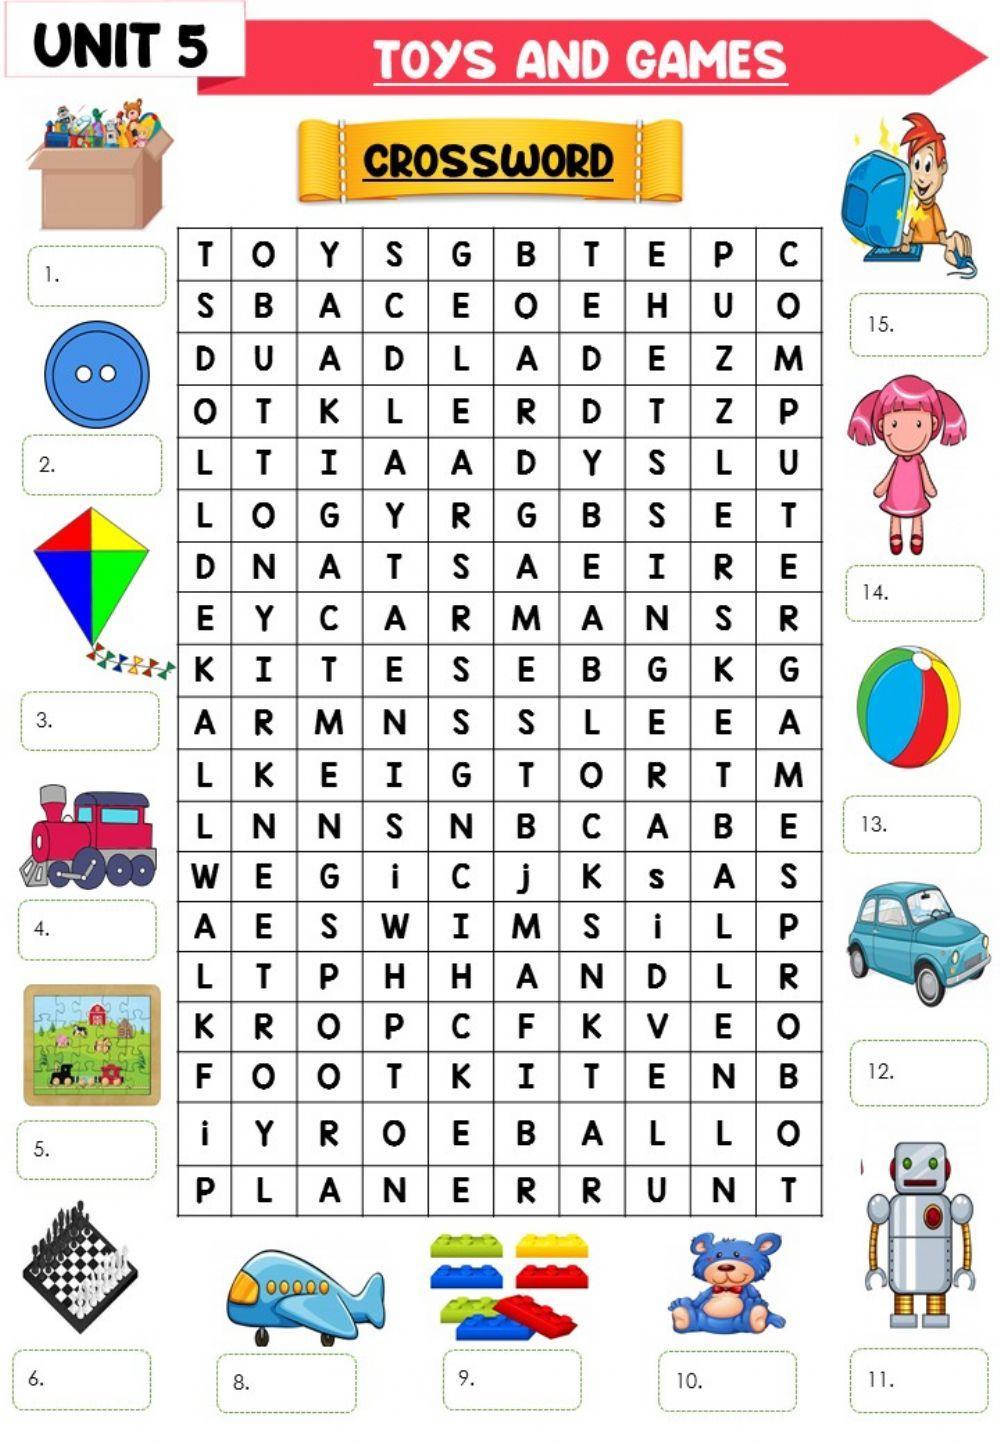 Toys and Games Crossword